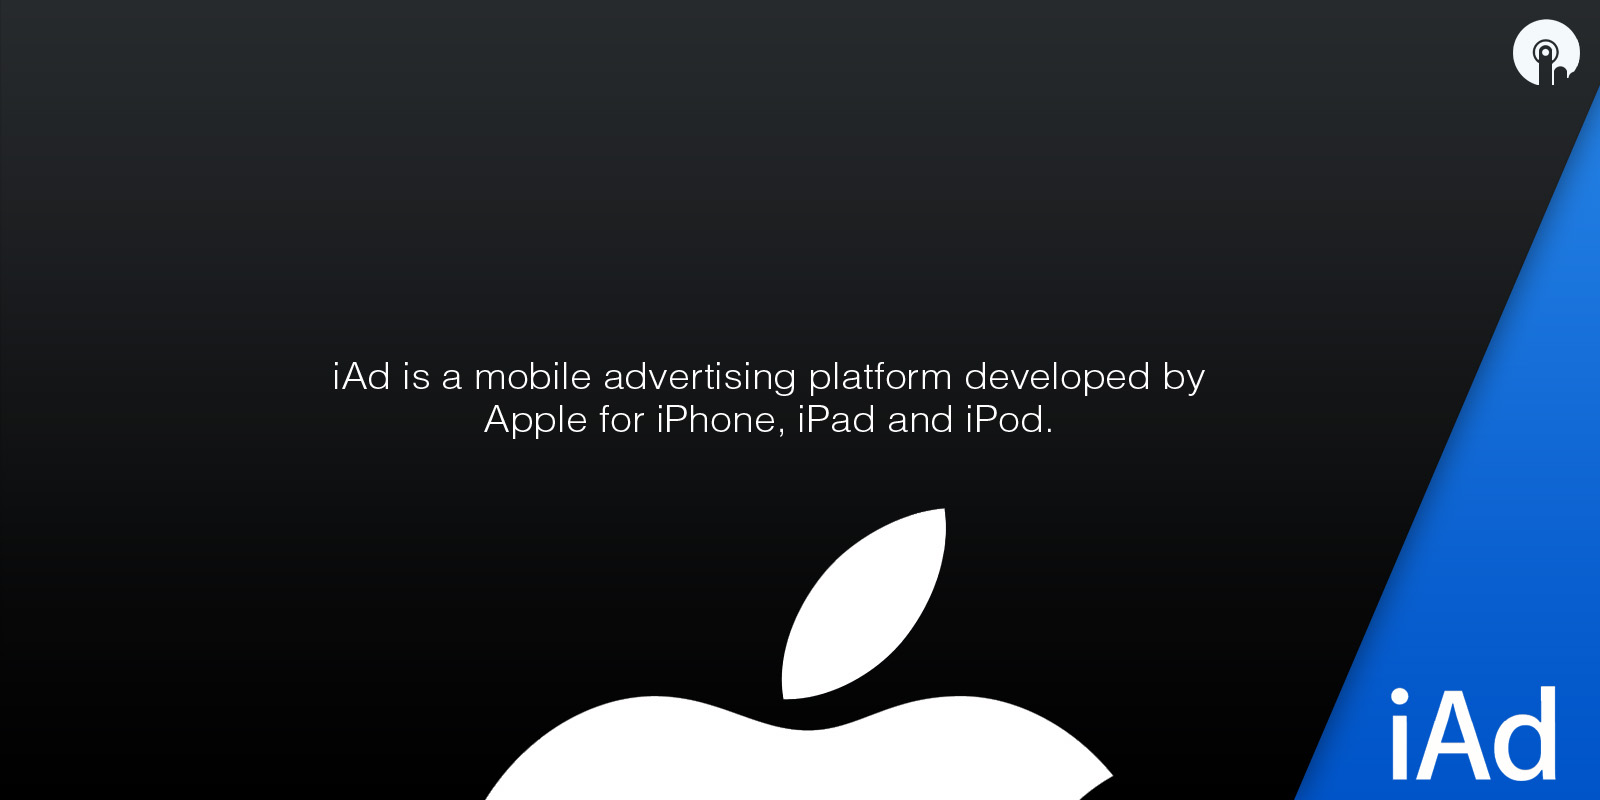 iAd advertising platform from apple for iPhone, iPad and iPod